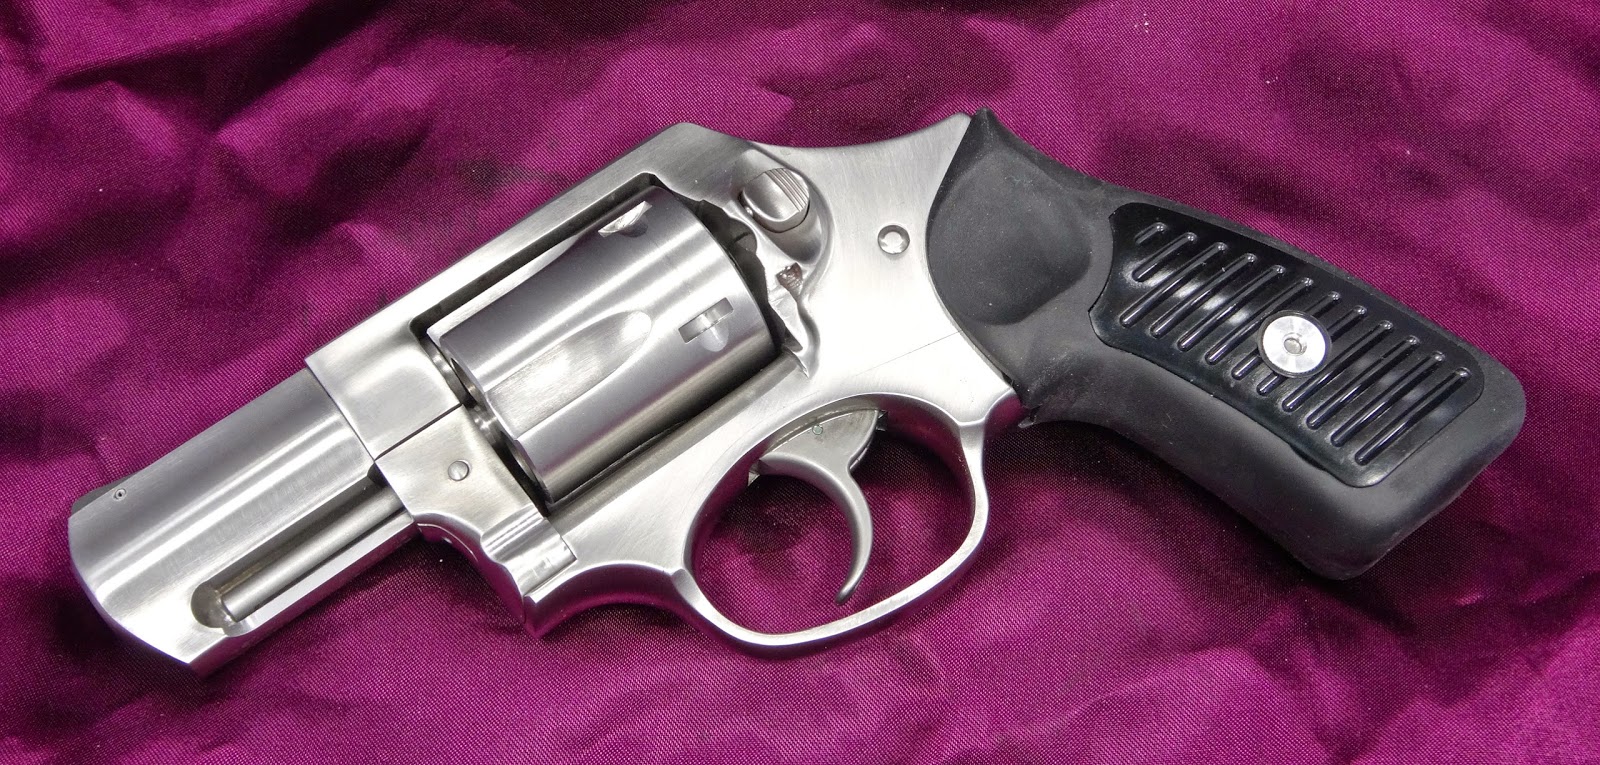 The Ruger SP101.